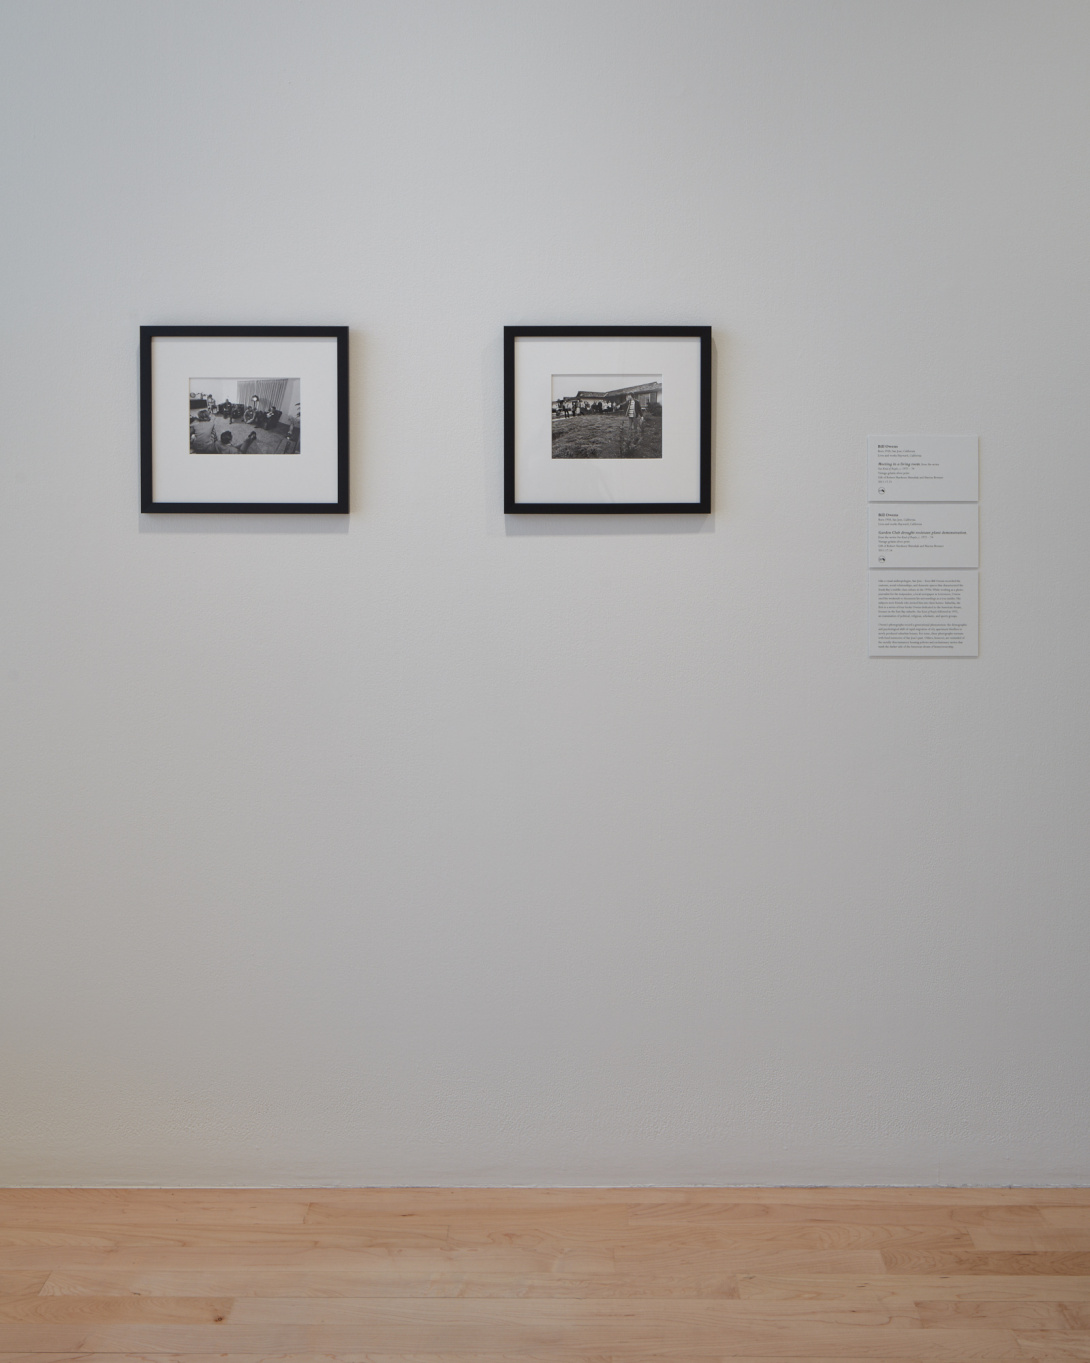 A white wall with two framed black and white photographs and three small text panels.